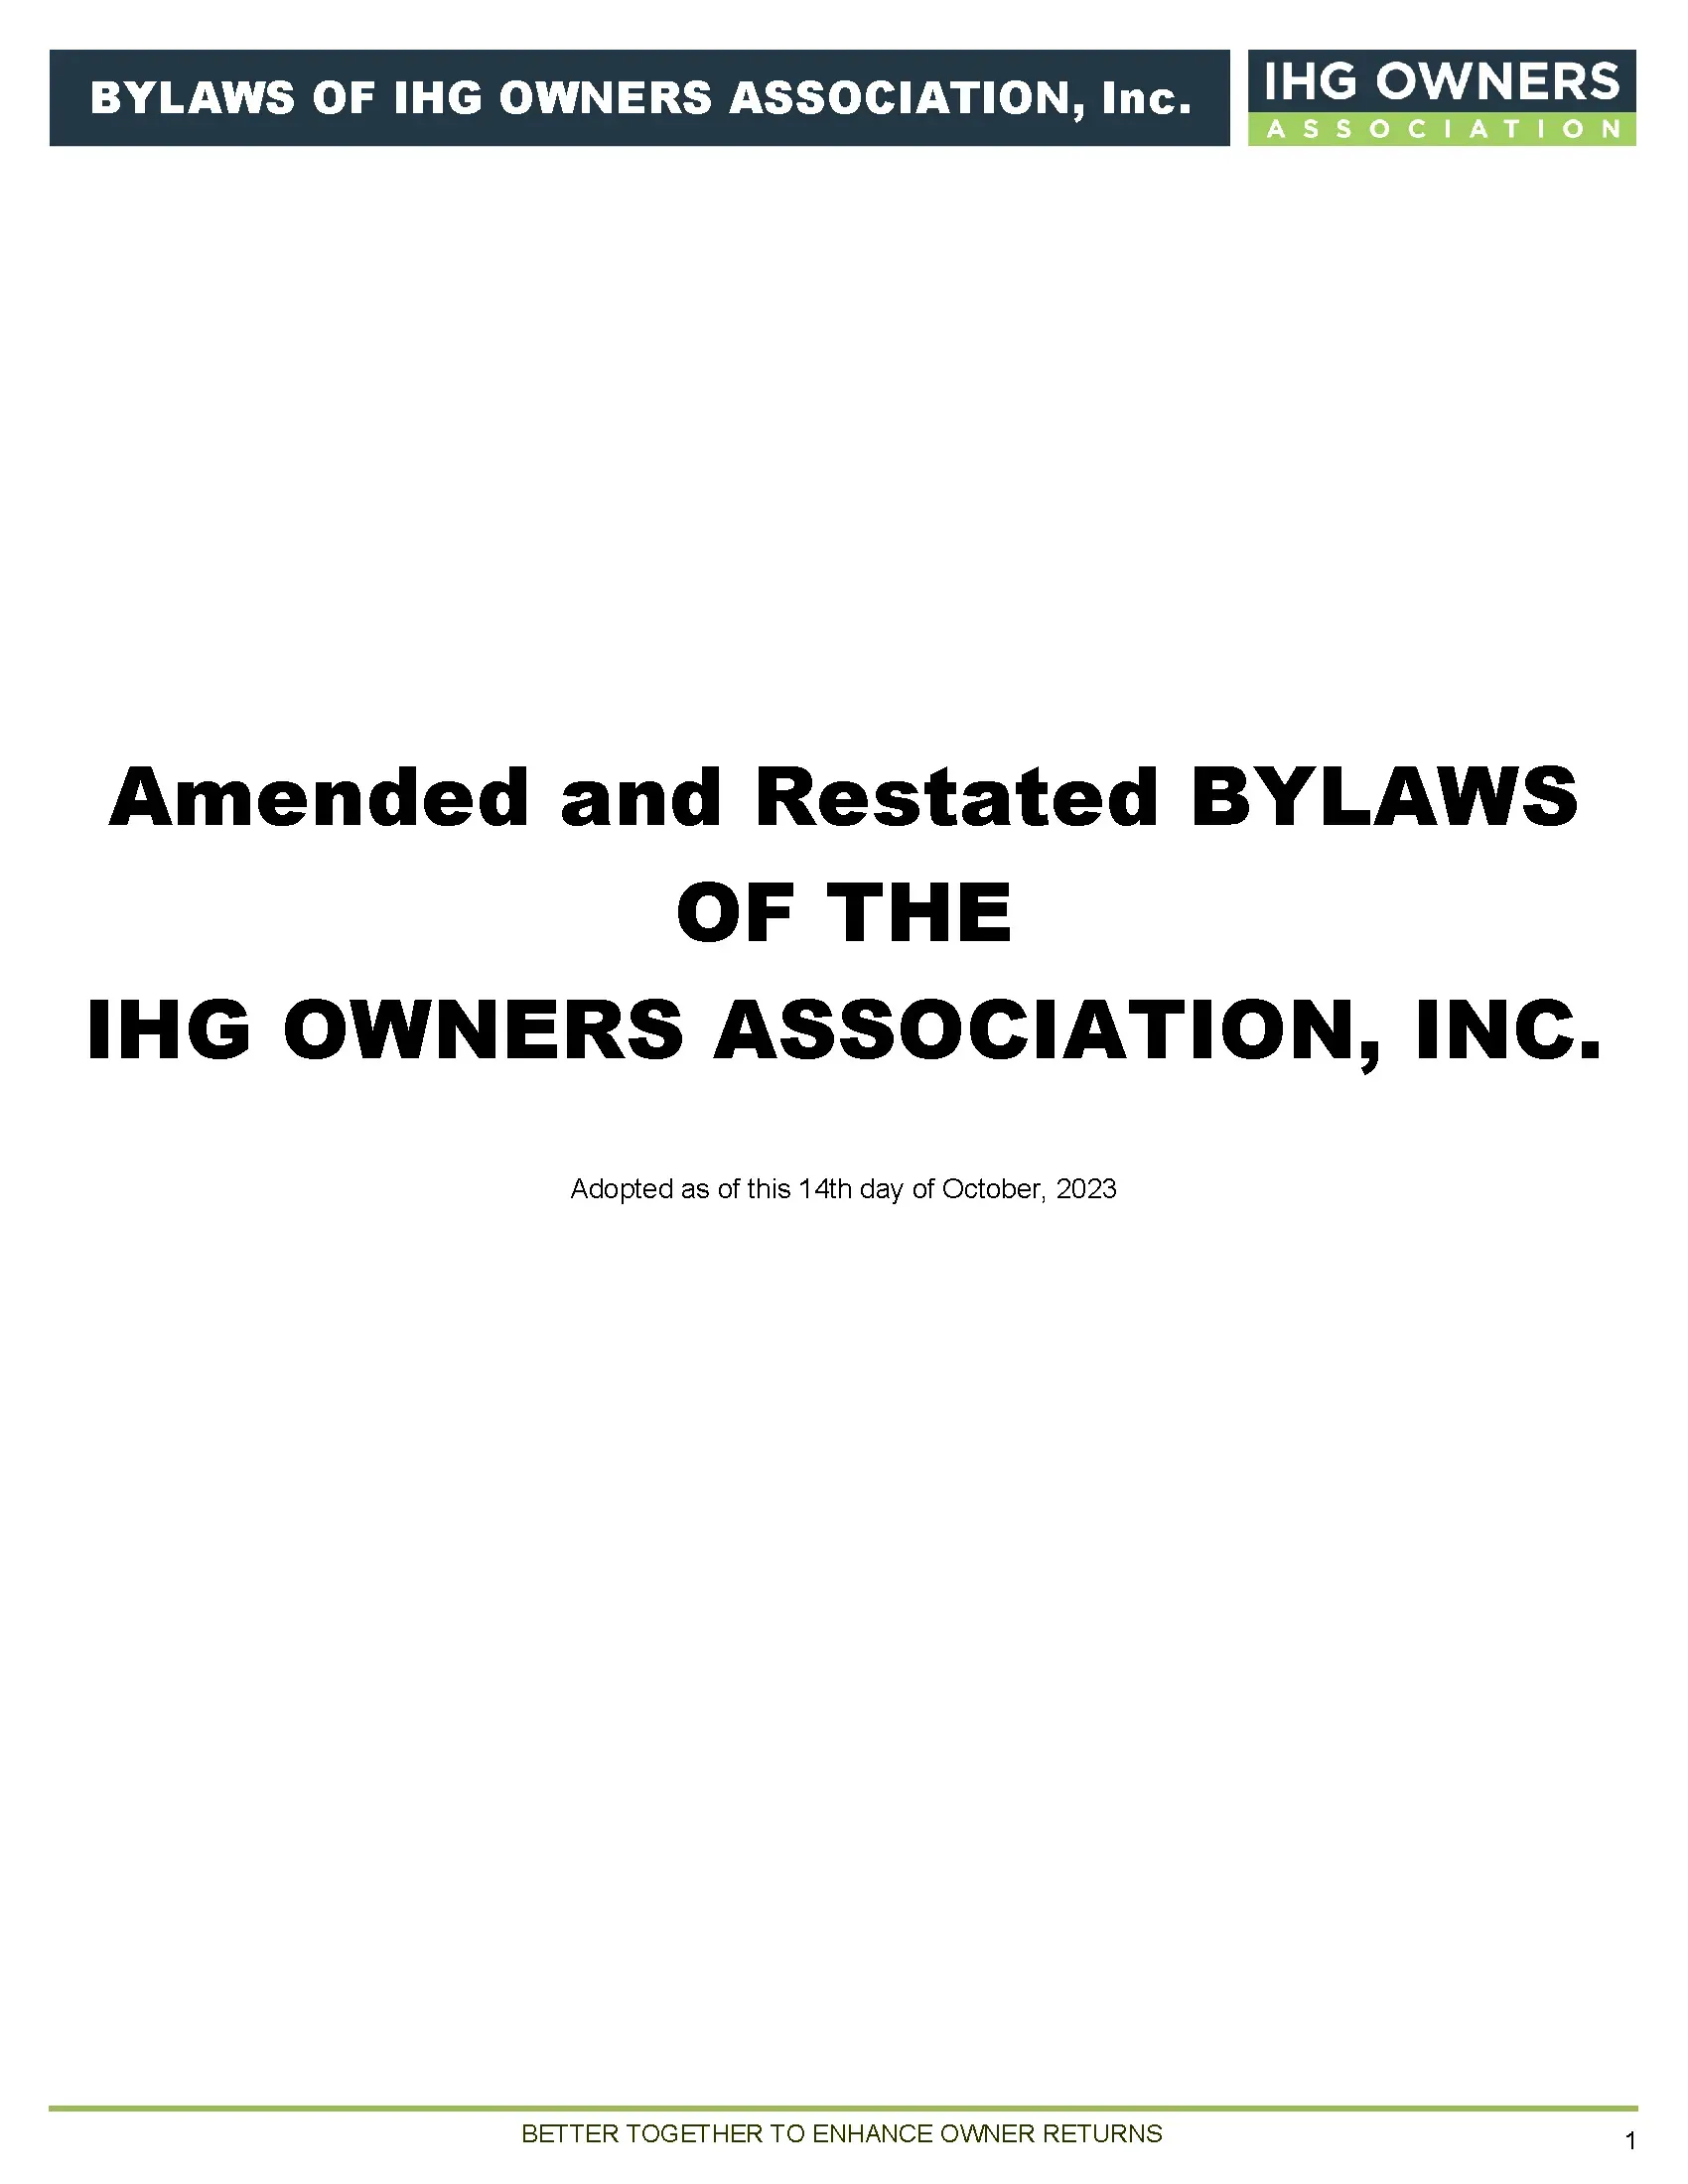 Cover of the Association's amended 2023 bylaws